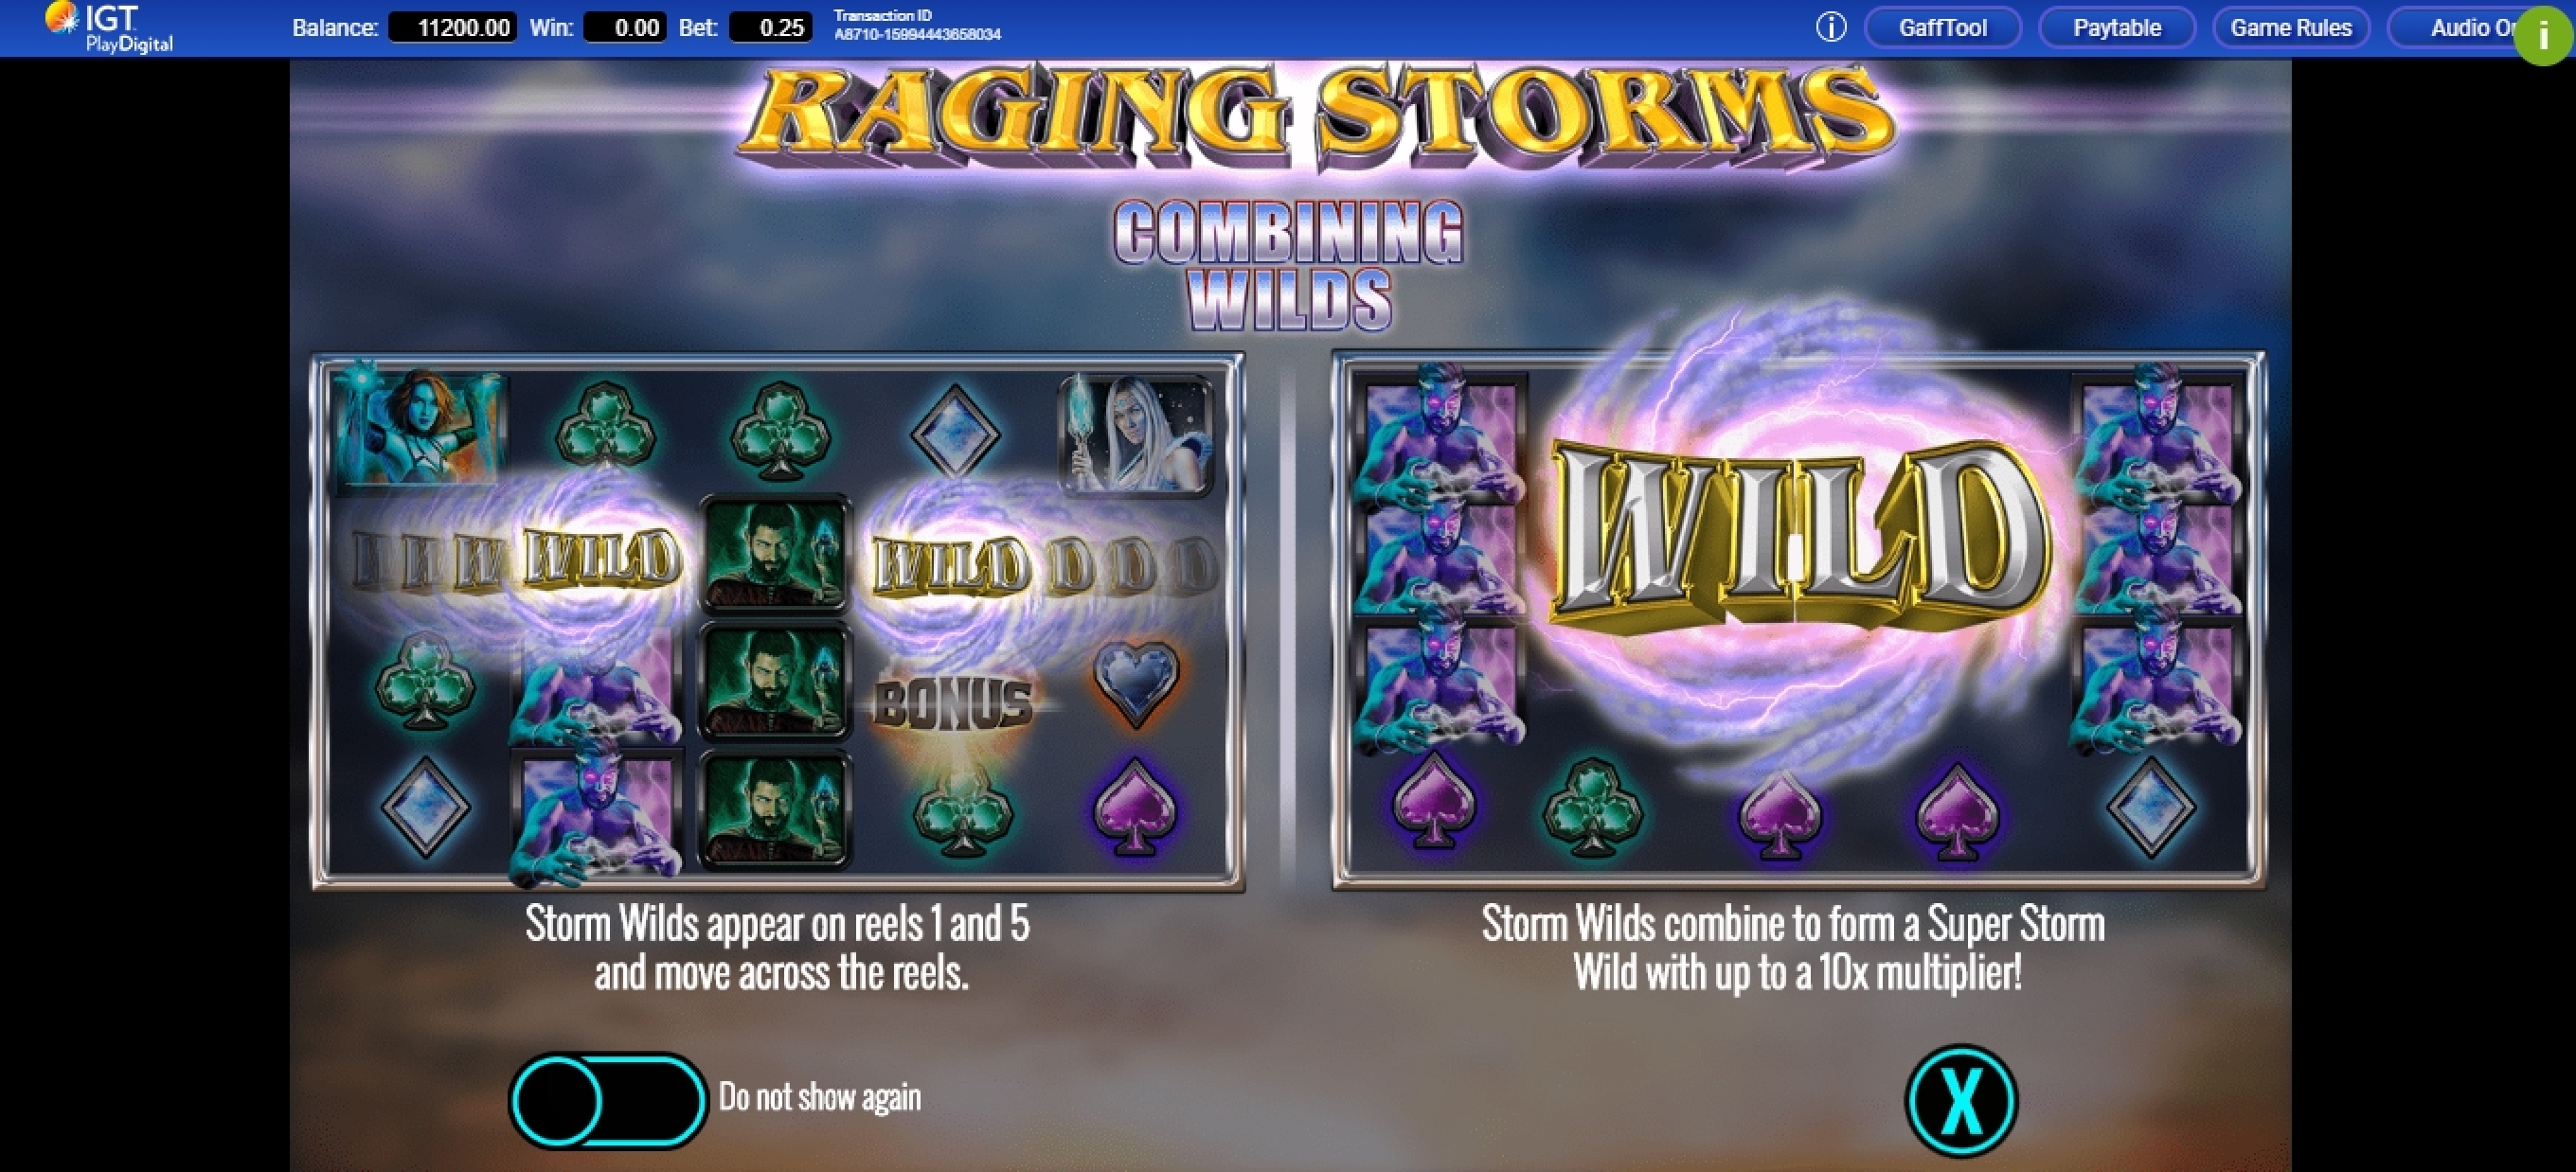 Play Raging Storms Free Casino Slot Game by IGT